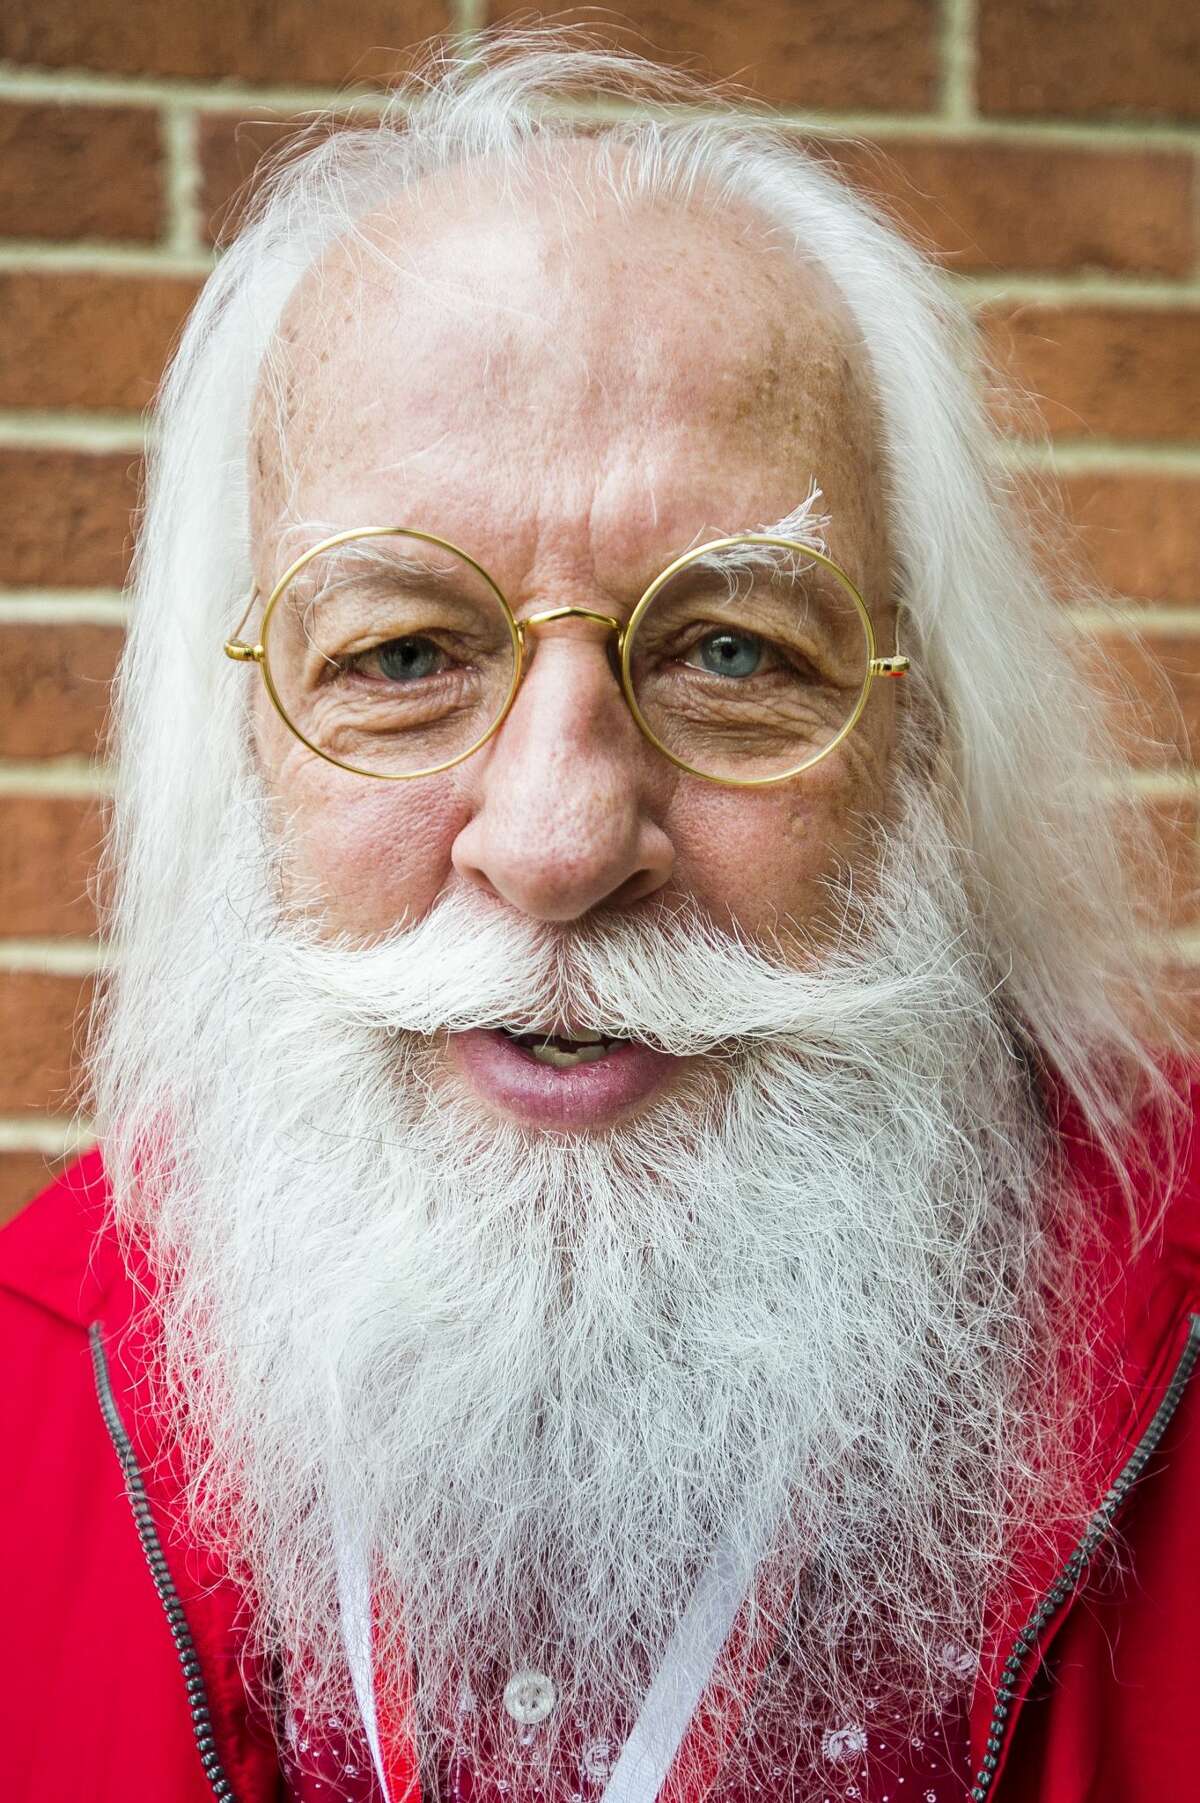 Everett Johnson of Tennessee, a participant in the 81st annual Charles W. Howard Santa Claus School, poses for a portrait on Saturday, Oct. 20, 2018 at the Midland Center for the Arts. (Katy Kildee/kkildee@mdn.net)